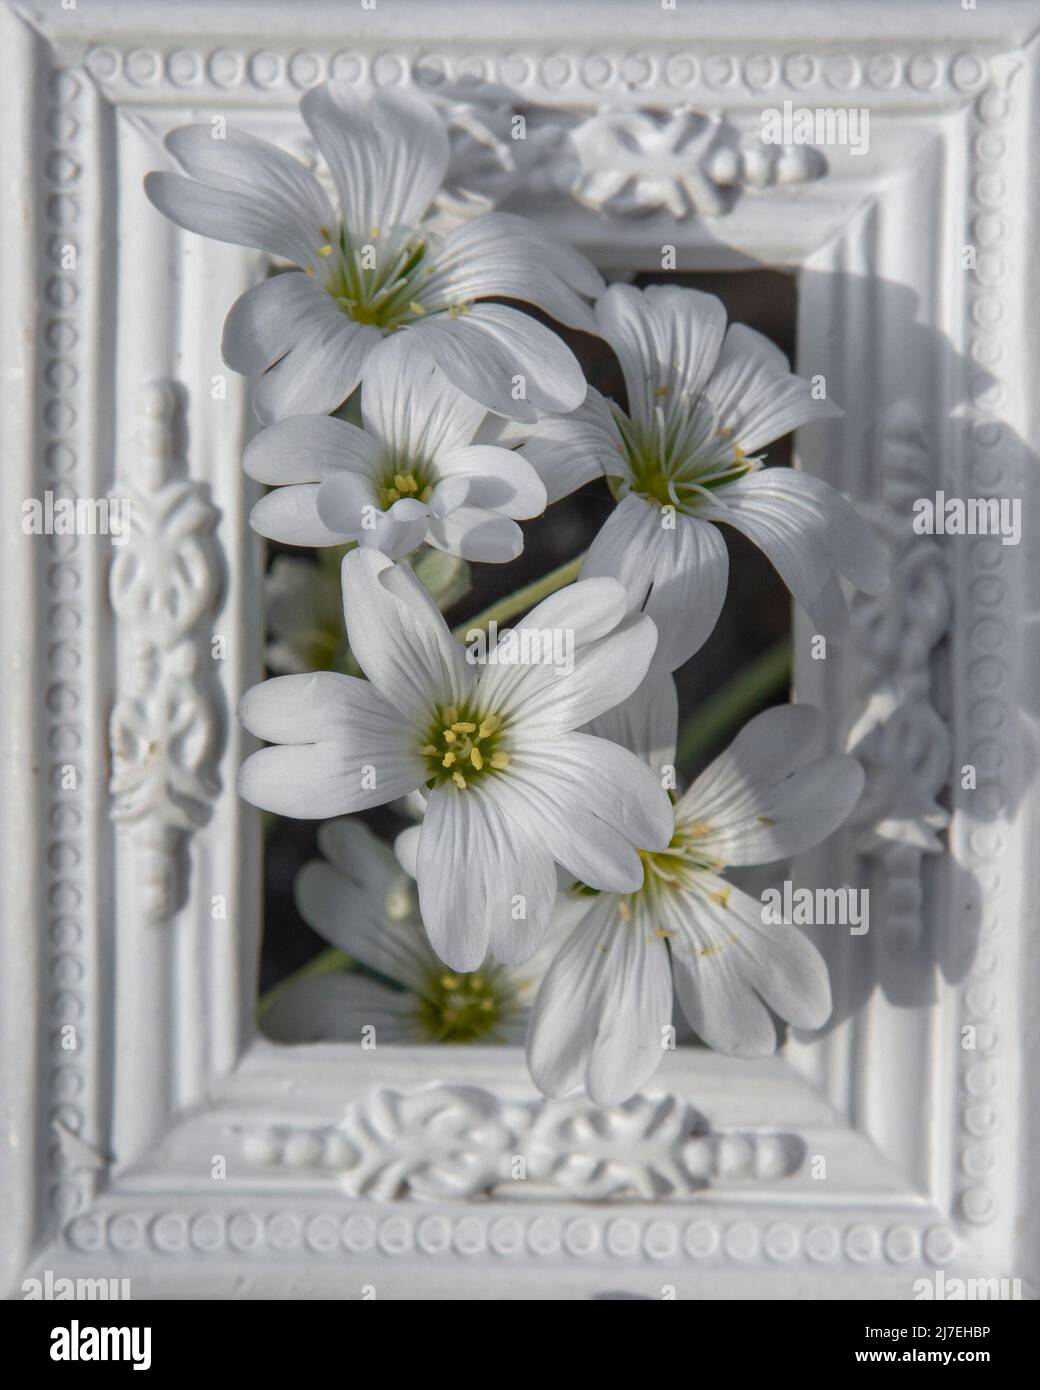 Blooming Cerastium tomentosum or Snow-in-summer white flowers in the white ornamental picture frame. Stock Photo